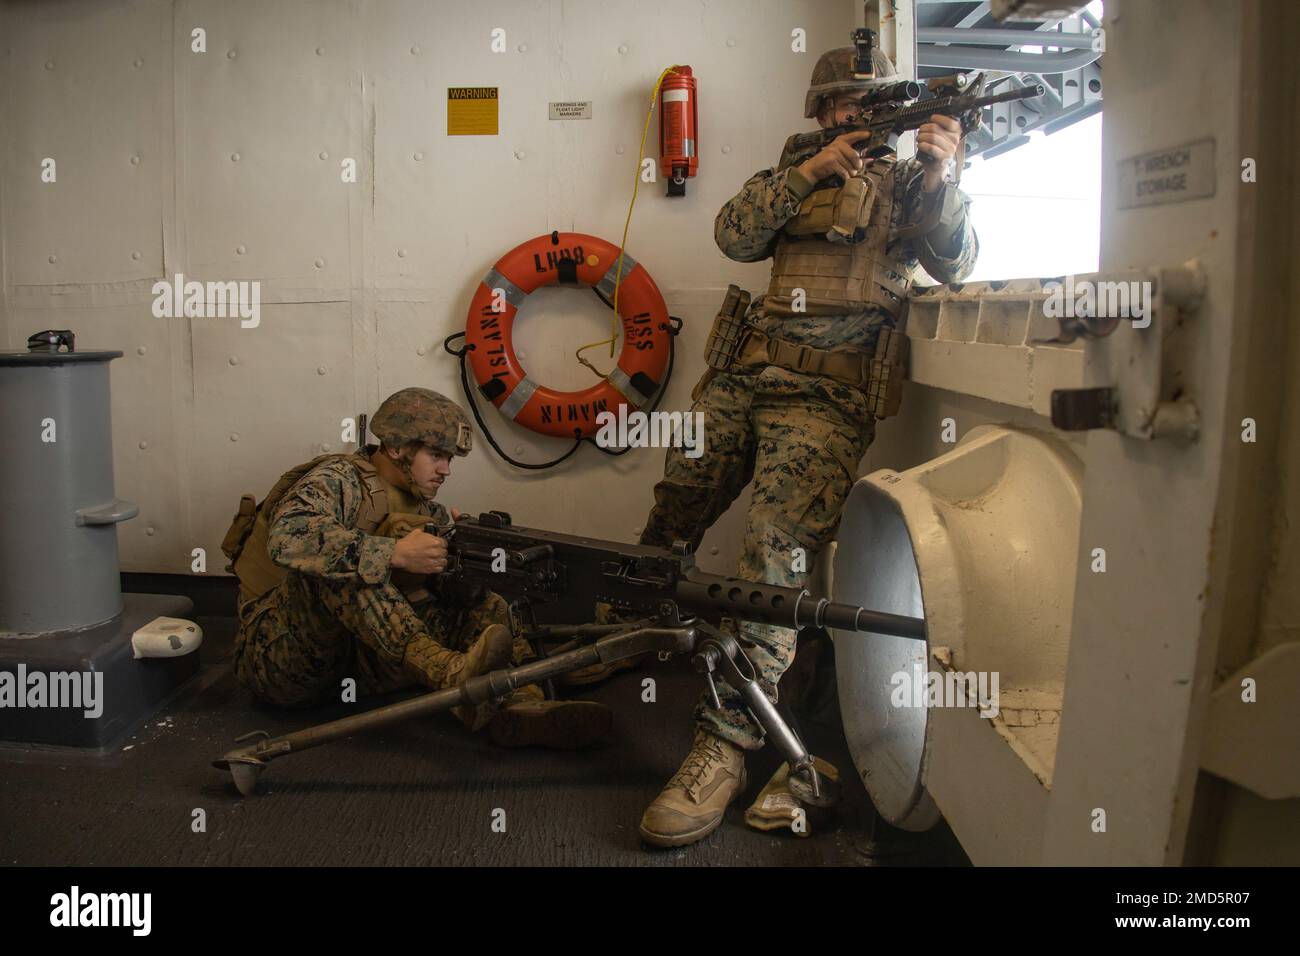 PACIFIC OCEAN (July 13, 2022) – U.S. Marine Corps Cpl. Brice Bailey, left, a machine gunner and Cpl. Jacob Tetzloff, an anti-tank missile gunner, both with Battalion Landing Team 2/4, 13th Marine Expeditionary Unit, spot a simulated enemy ship during a Defense of the Amphibious Task Force exercise aboard amphibious assault ship USS Makin Island (LHD 8), July 13. The 13th MEU is currently embarked aboard the USS Makin Island conducting routine operations in the U.S. 3rd Fleet. Stock Photo